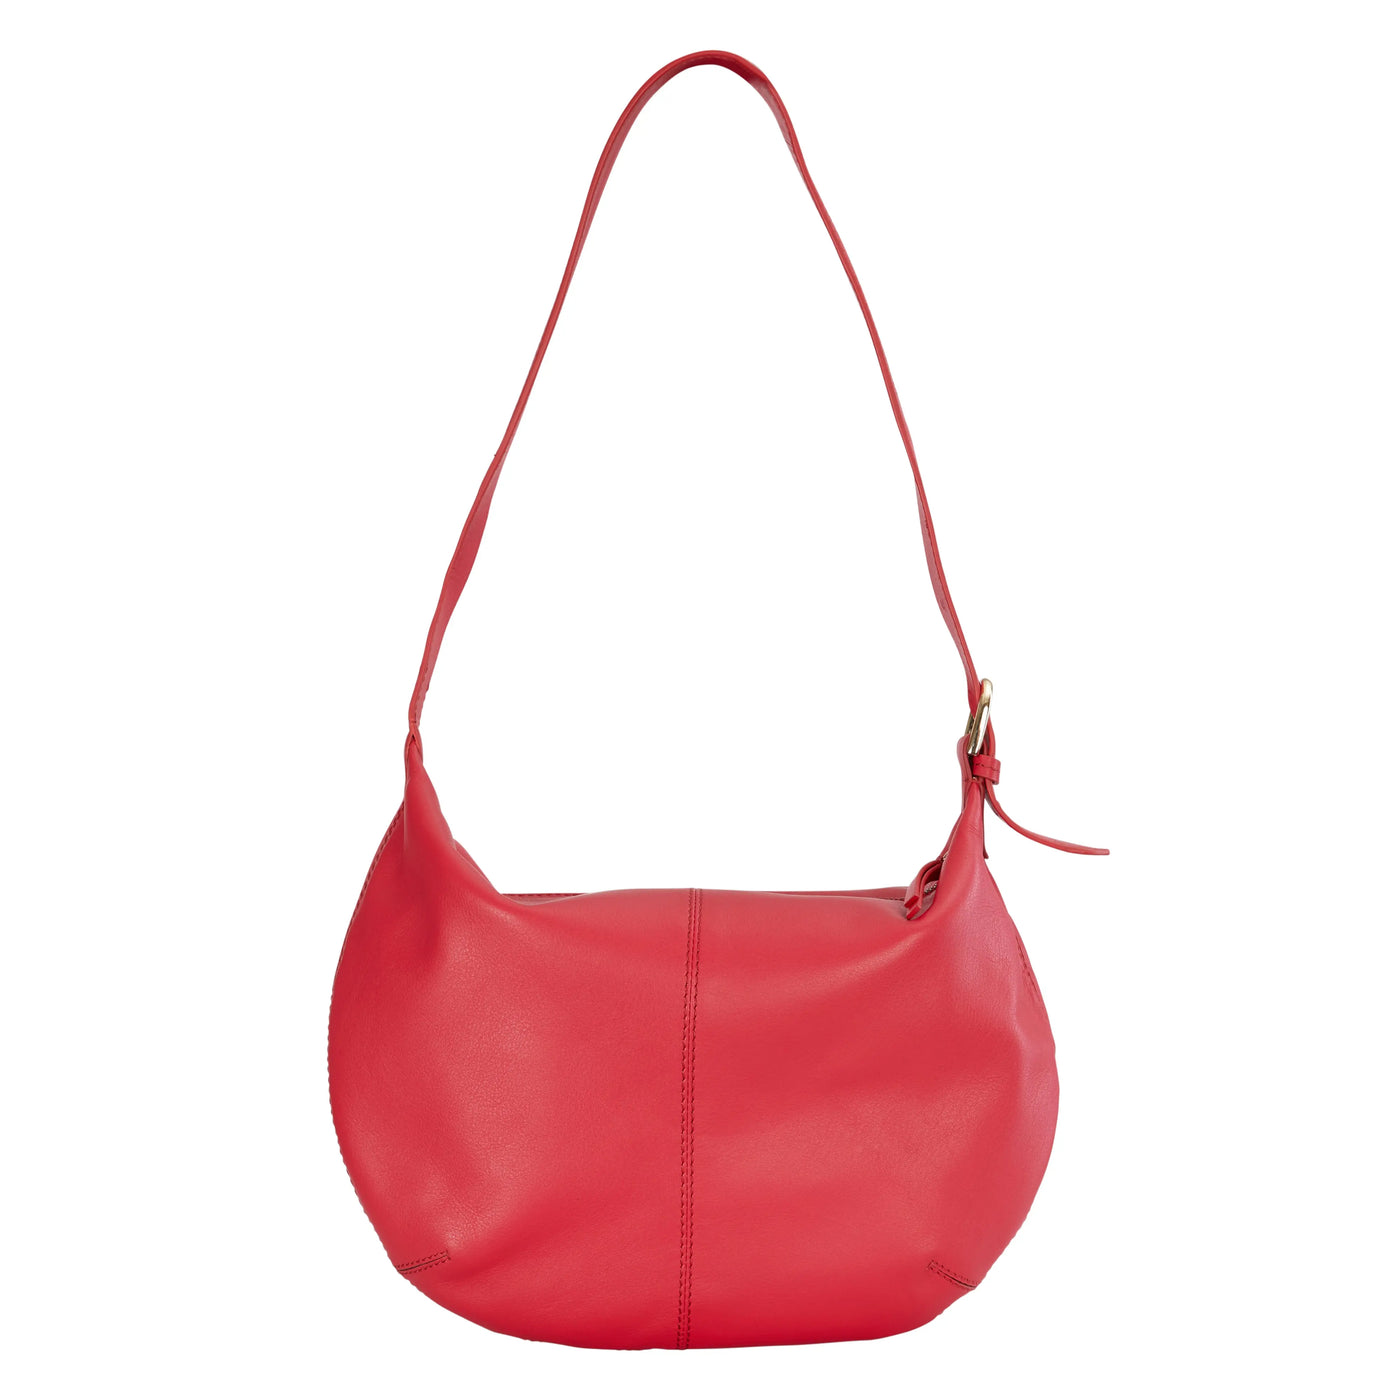 Lucy Hobo bag in 3 colors